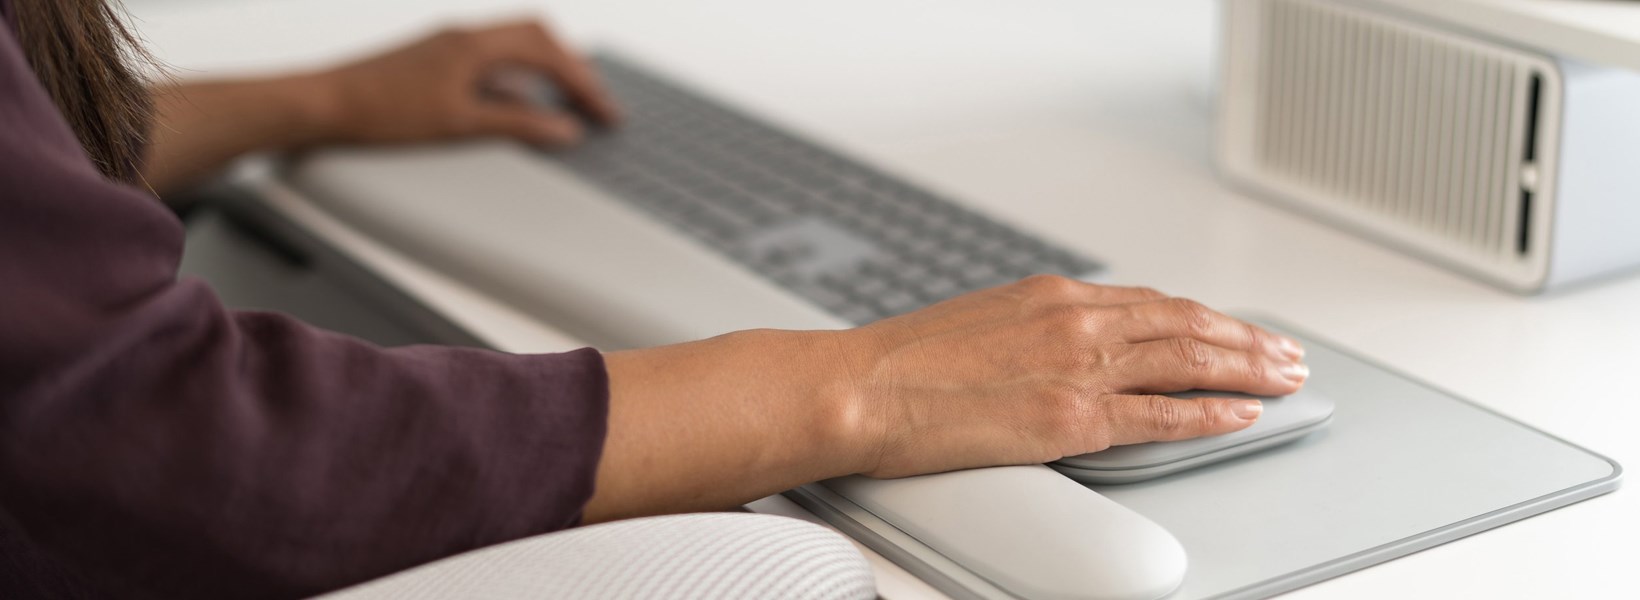 Woman typing on a keyboard and using a mouse paired with a wrist rest